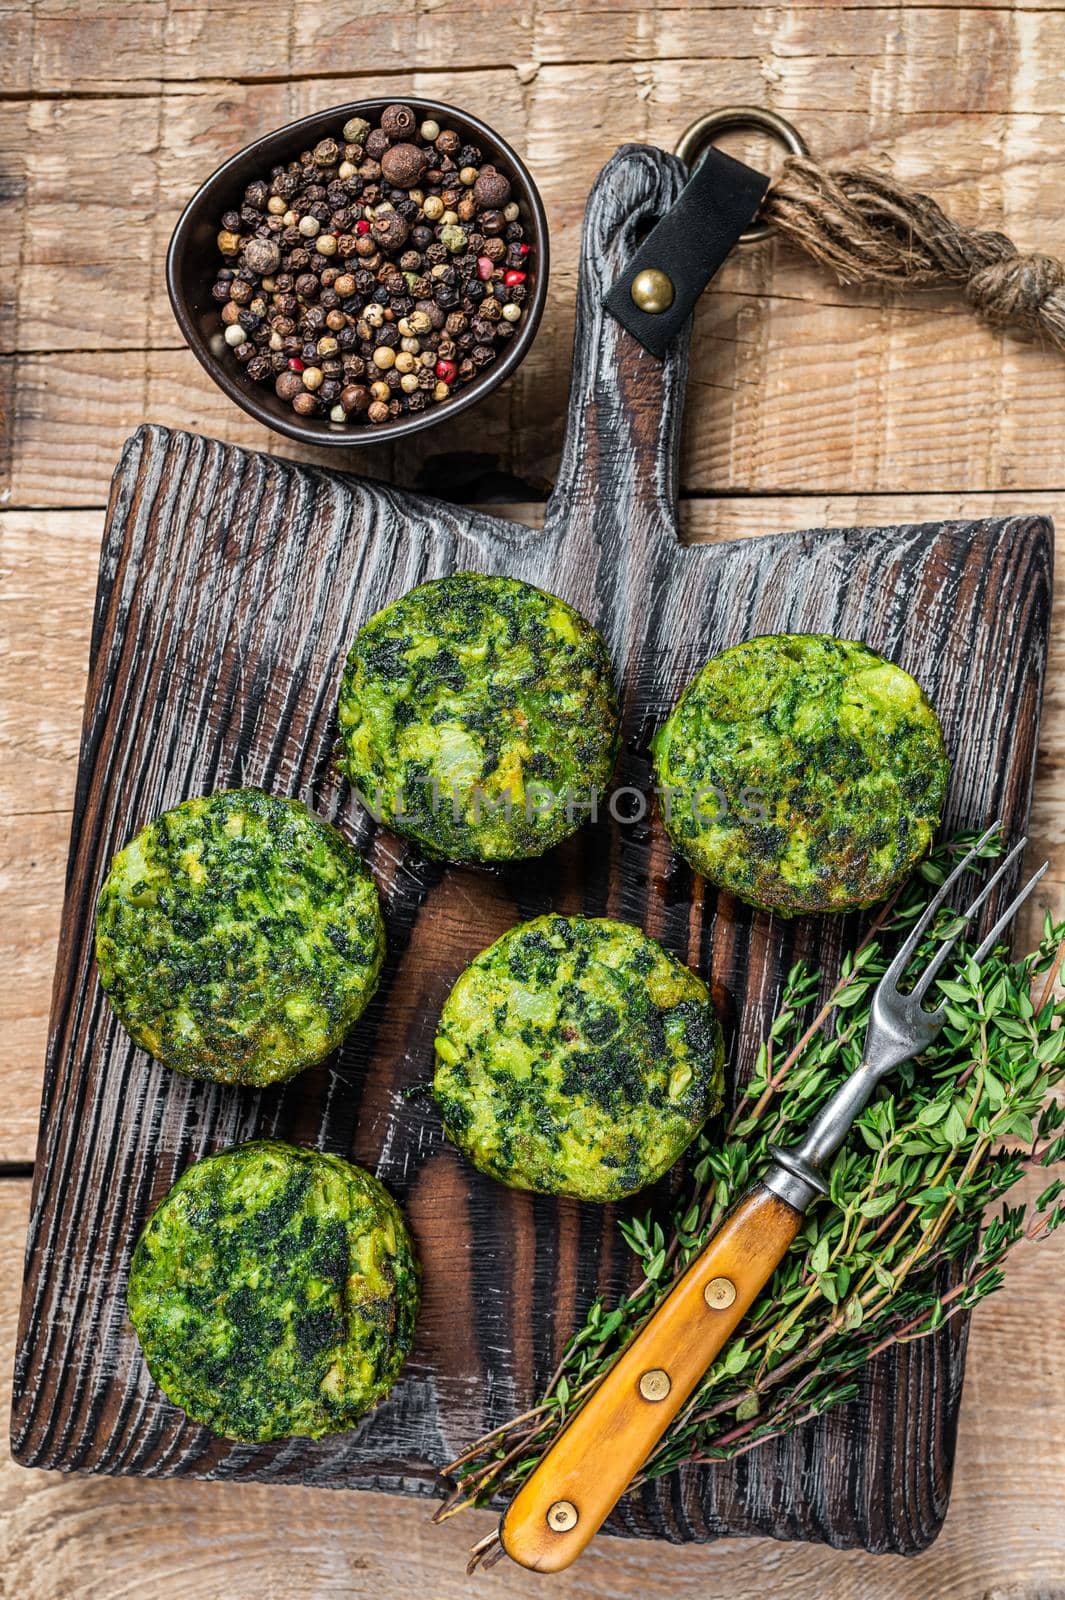 Vegetarian vegetable burgers patty with herbs on wooden board. Wooden background. Top view.